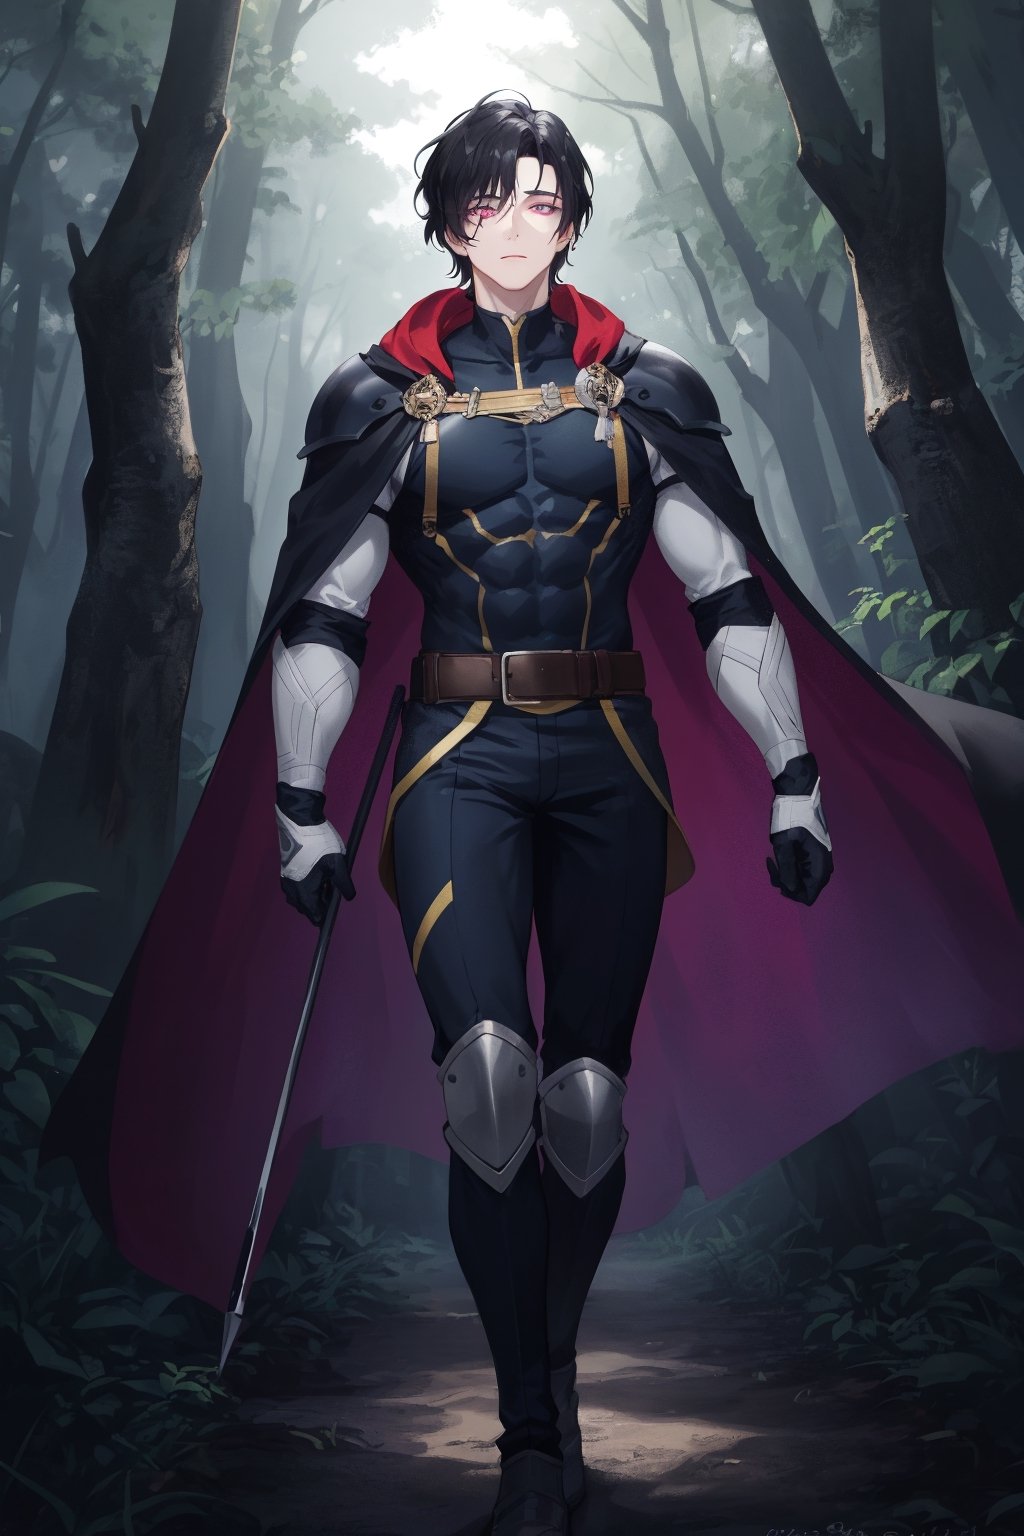 1man, young man,  25 years old,  short black hair,wavy hair,  glowing violet eyes, pale skin,  walking in a magical forest,  magical forest background,  day,  day light, wearing a hunter armor,black feather cape,  training,  challenger face,  fitness body,  piece teacher,  perfect face,  high quality,  American shot,  perfect face,  perfect hands,  muscular sensual body,  aesthetic and sensual body, Detailedface,1boy